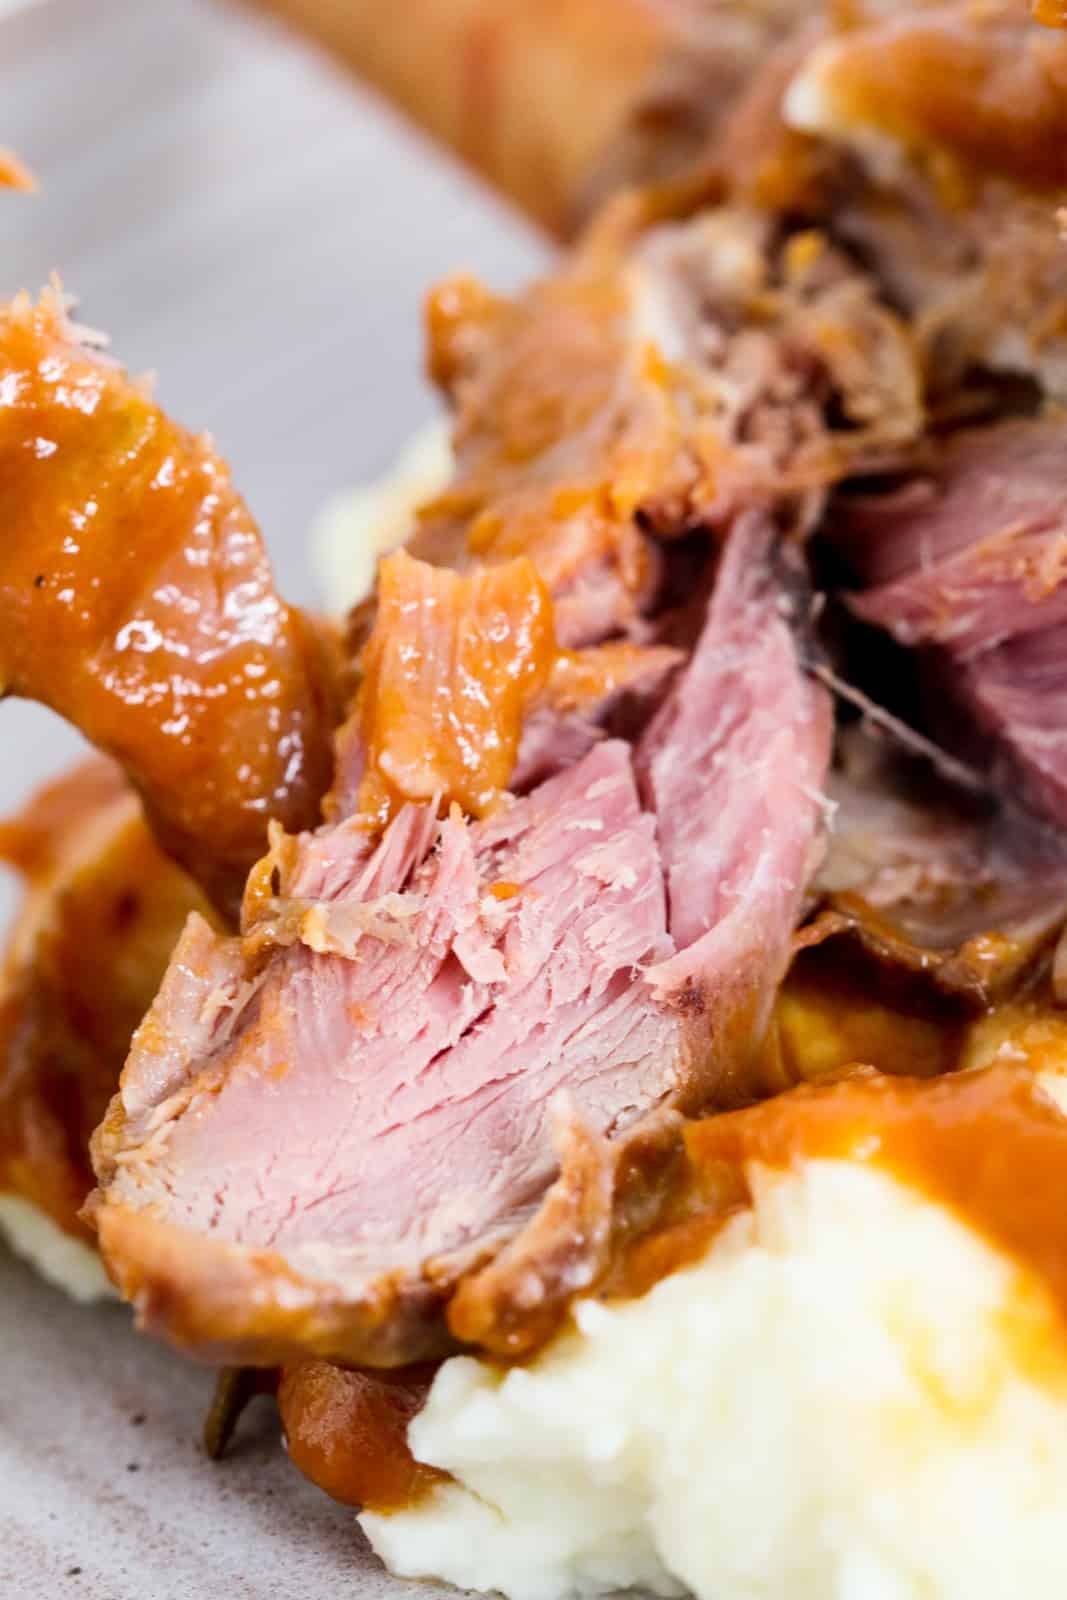 A close up image of cooked lamb with mashed potatoes and a tomato based gravy.